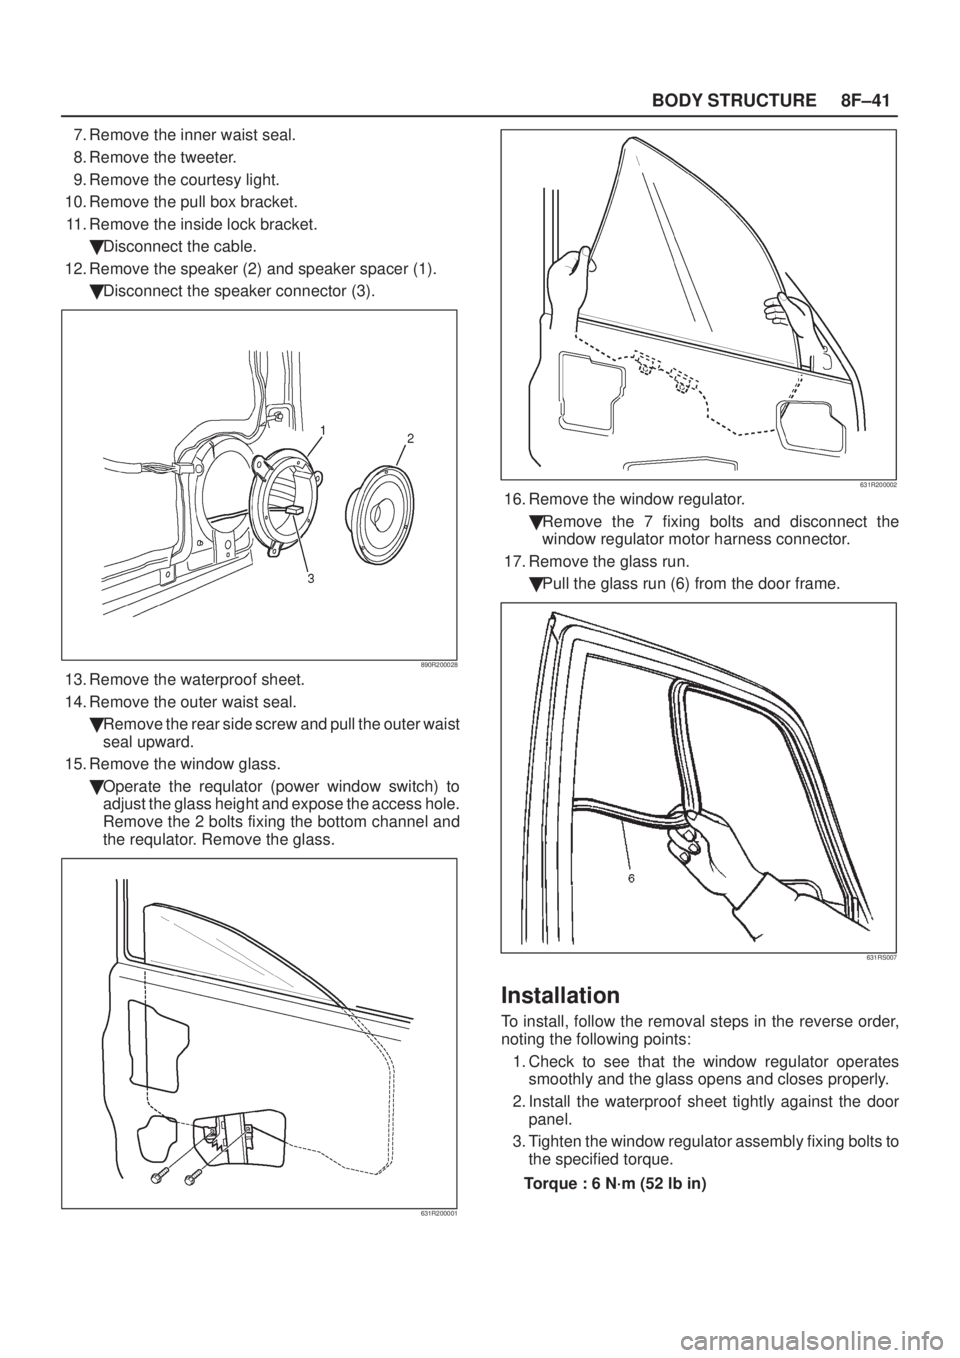 ISUZU AXIOM 2002  Service Repair Manual 8F±41 BODY STRUCTURE
7. Remove the inner waist seal.
8. Remove the tweeter.
9. Remove the courtesy light.
10. Remove the pull box bracket.
11. Remove the inside lock bracket.
Disconnect the cable.
1